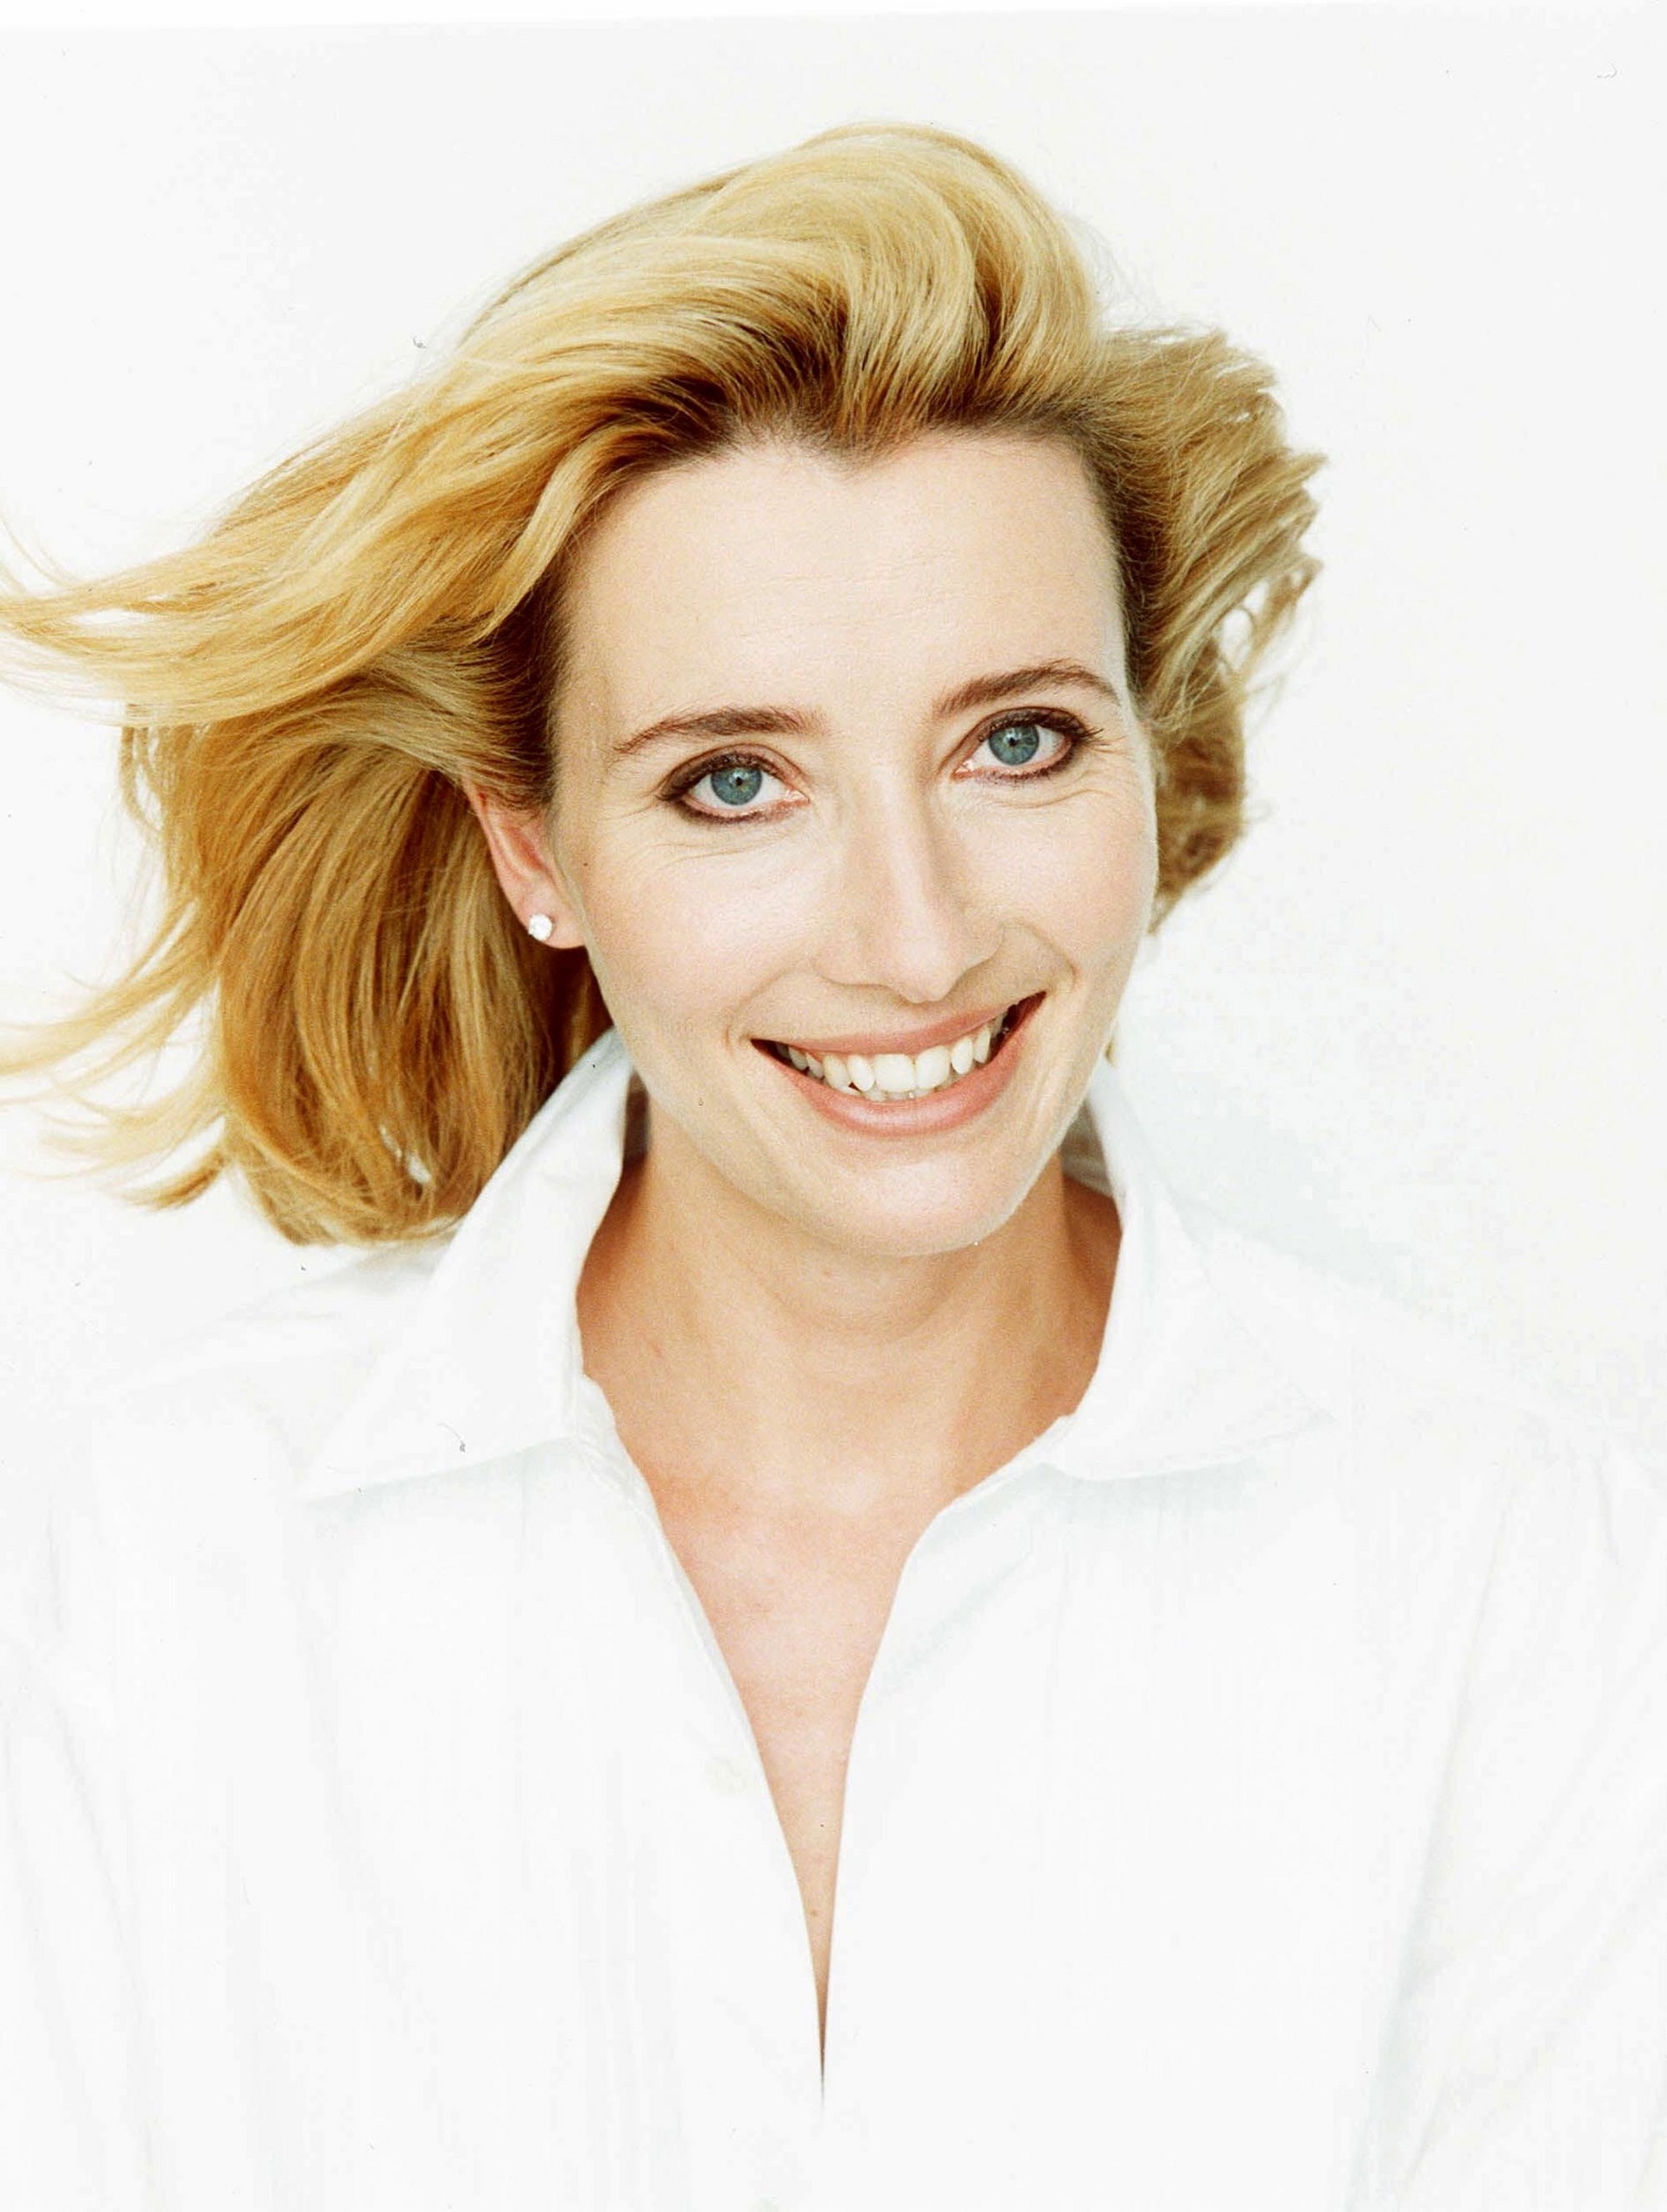 Emma Thompson Image Gorgeous Smile HD Wallpaper And